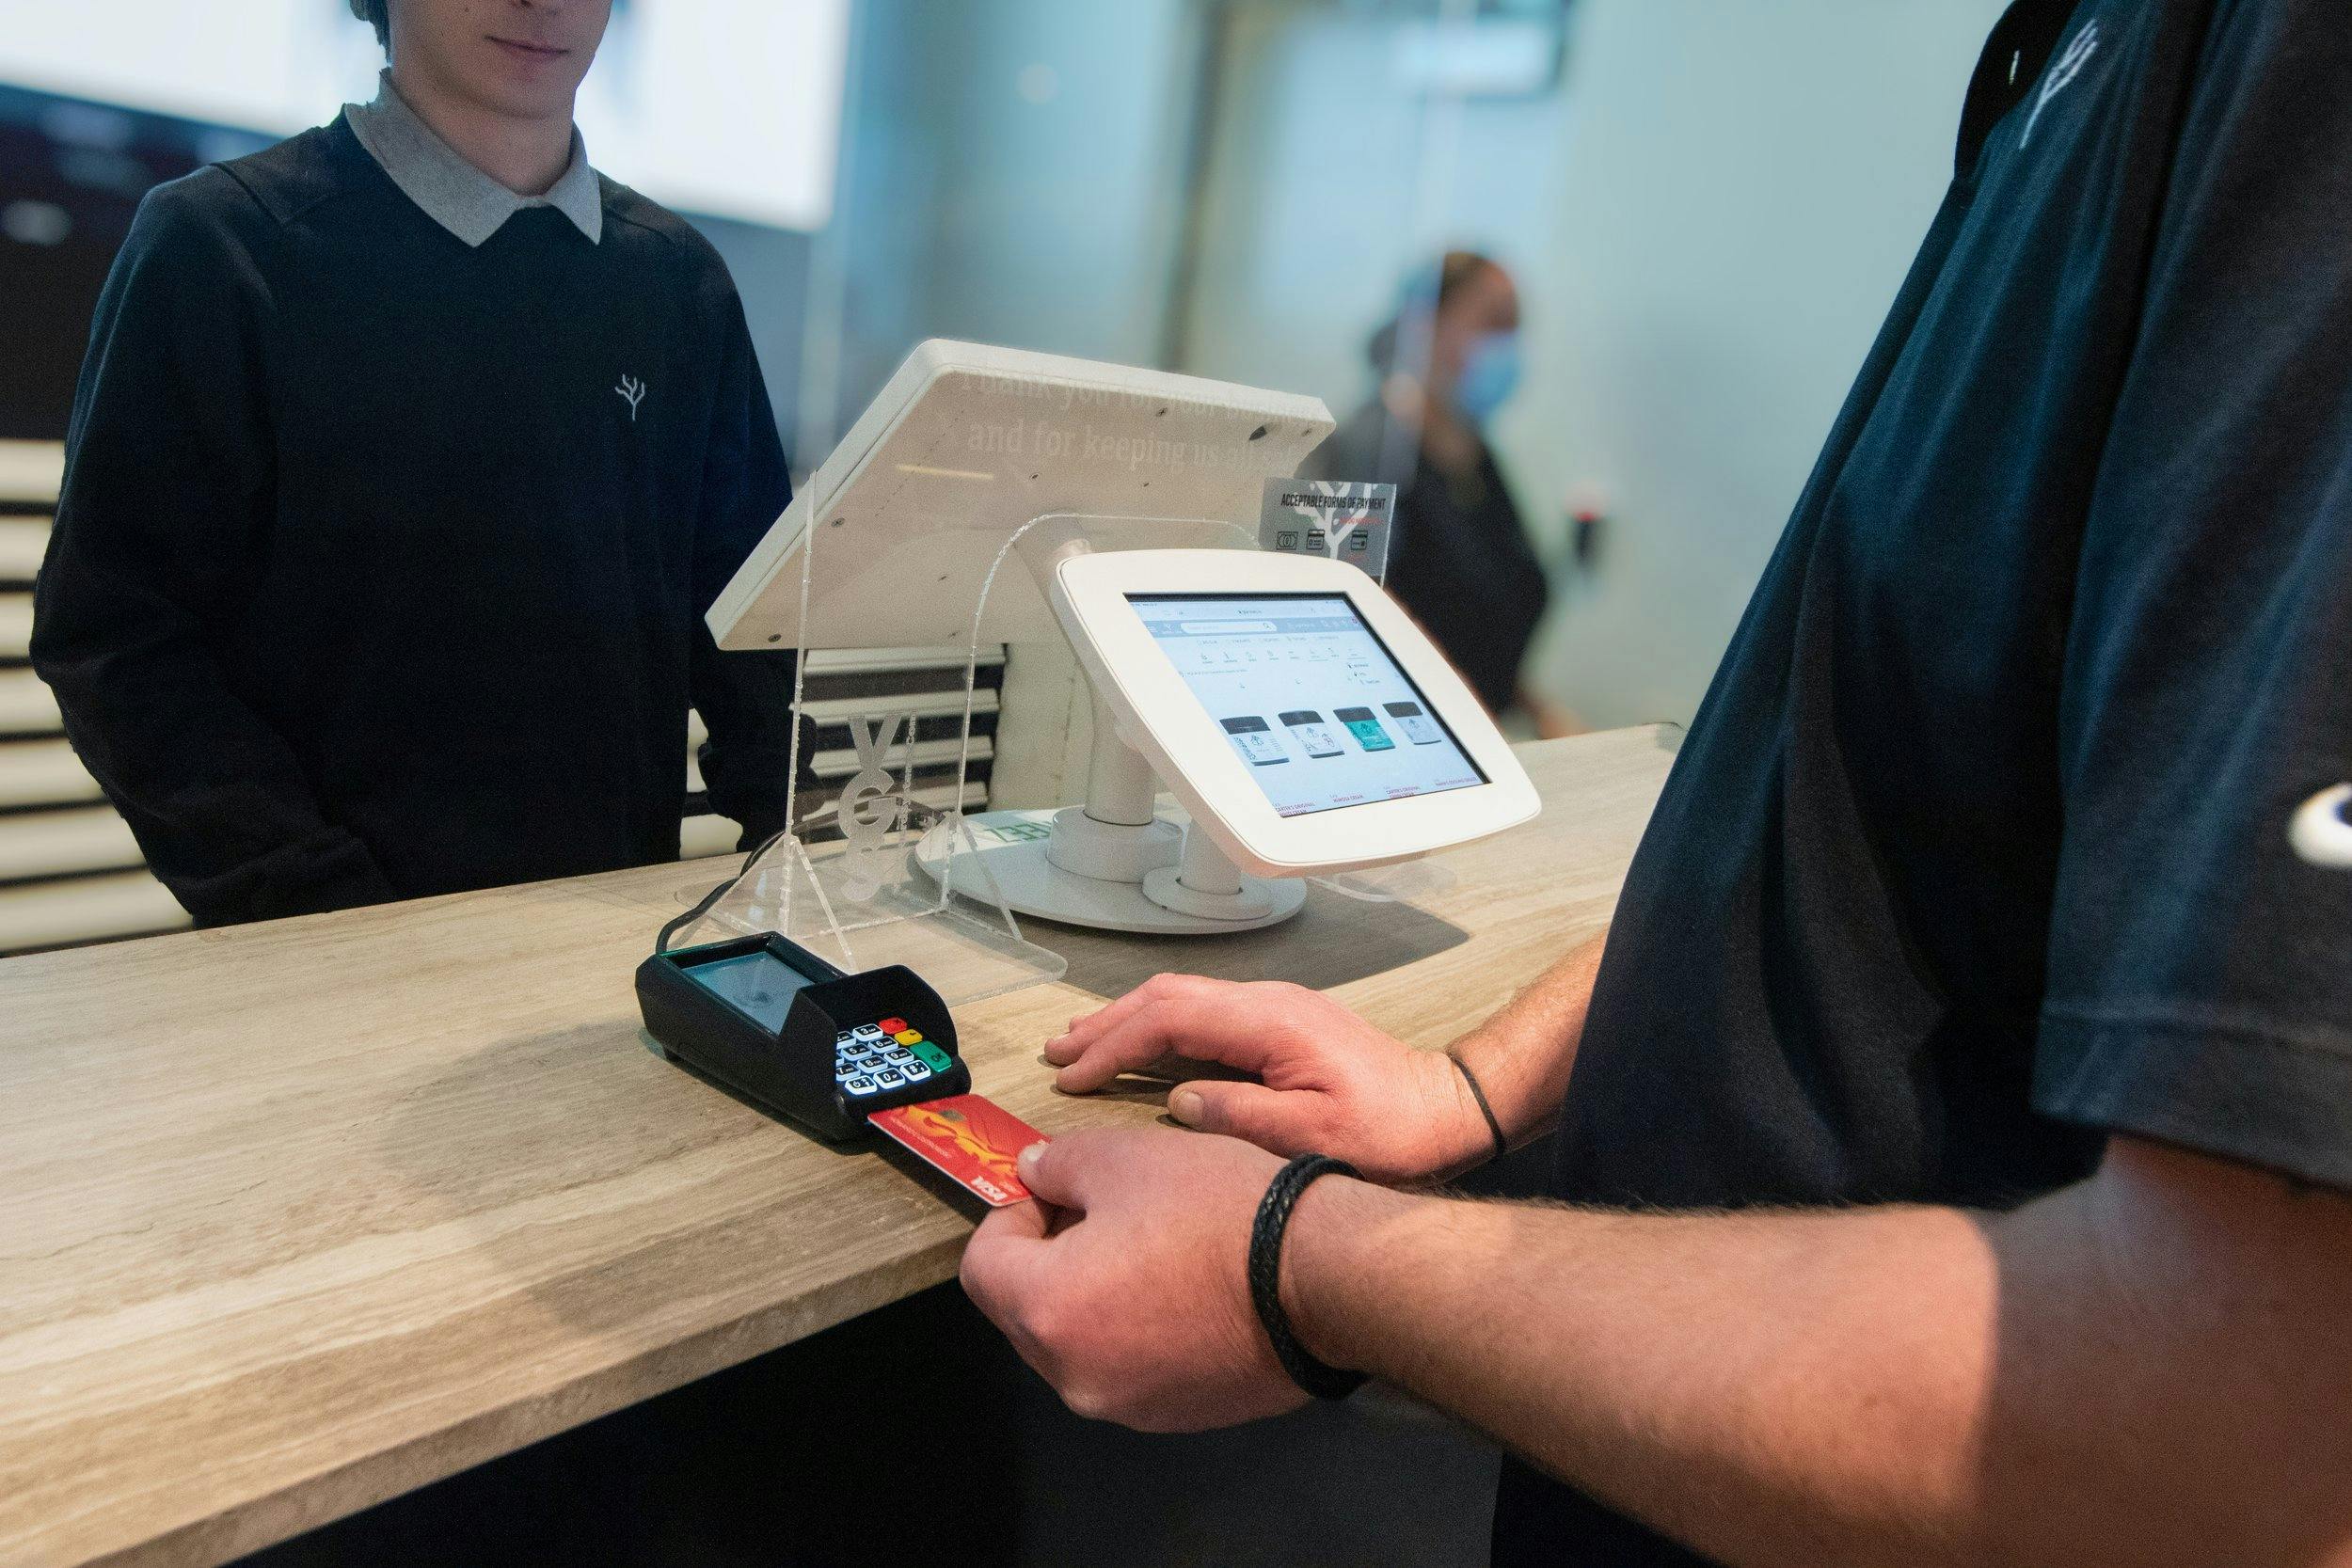 A customers at Garden of Eden dispensary pushes their debit card into a terminal to pay for their cannabis with a card